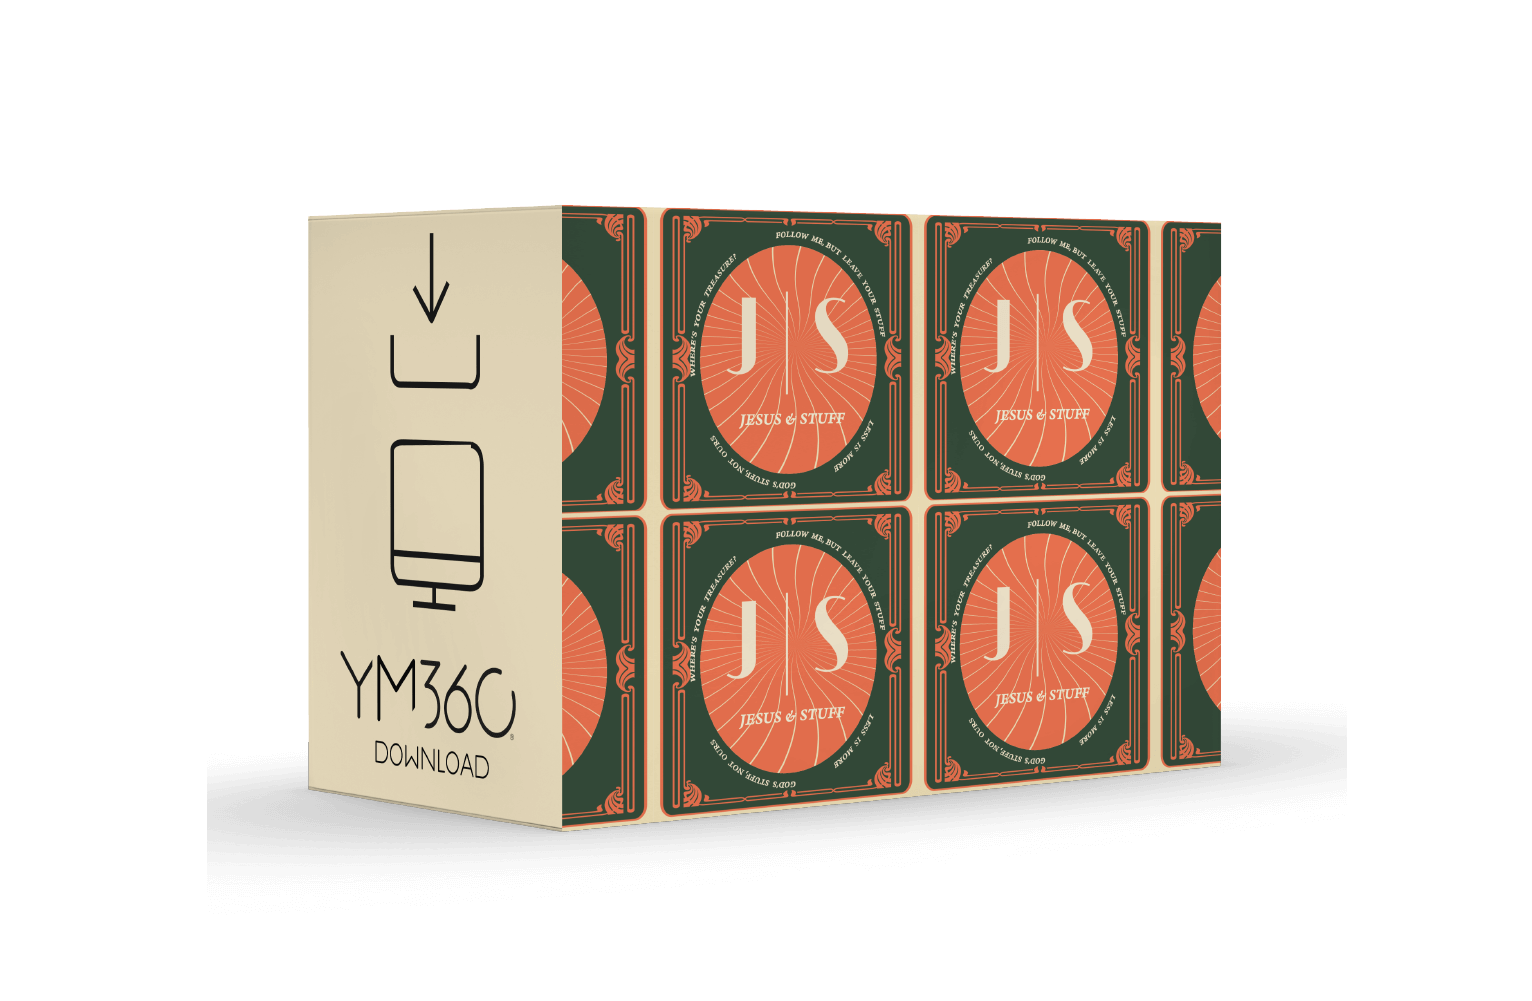 Jesus and Stuff - a 4-week Youth Ministry Bible Study — YM360